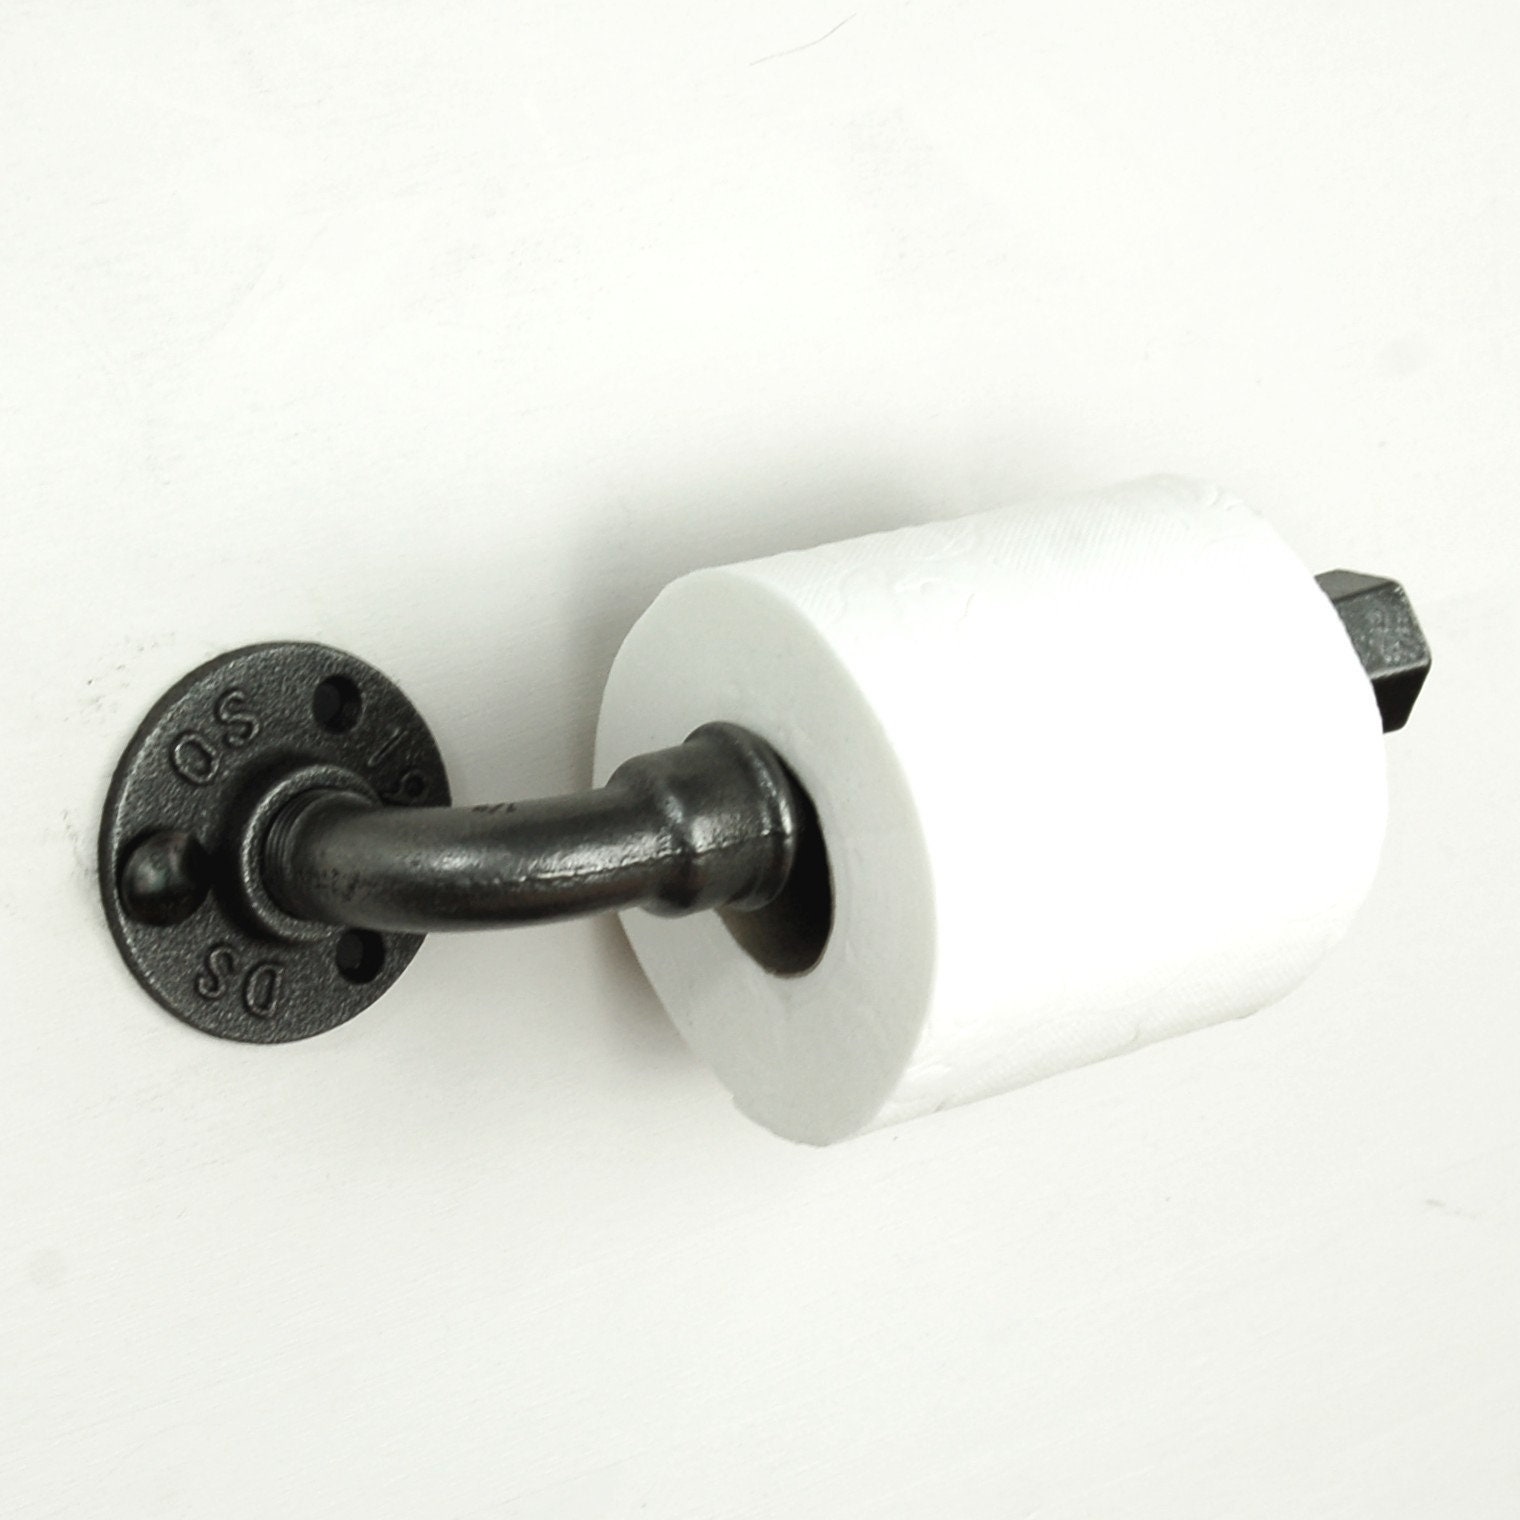 Black Electroplated Pipe Holders Lerro Industrial Toilet Paper Holders Dual Toilet Roll Holder Washroom Double Paper Tower Holder Wall Mount with Wood Shelf Storage for Bathroom 